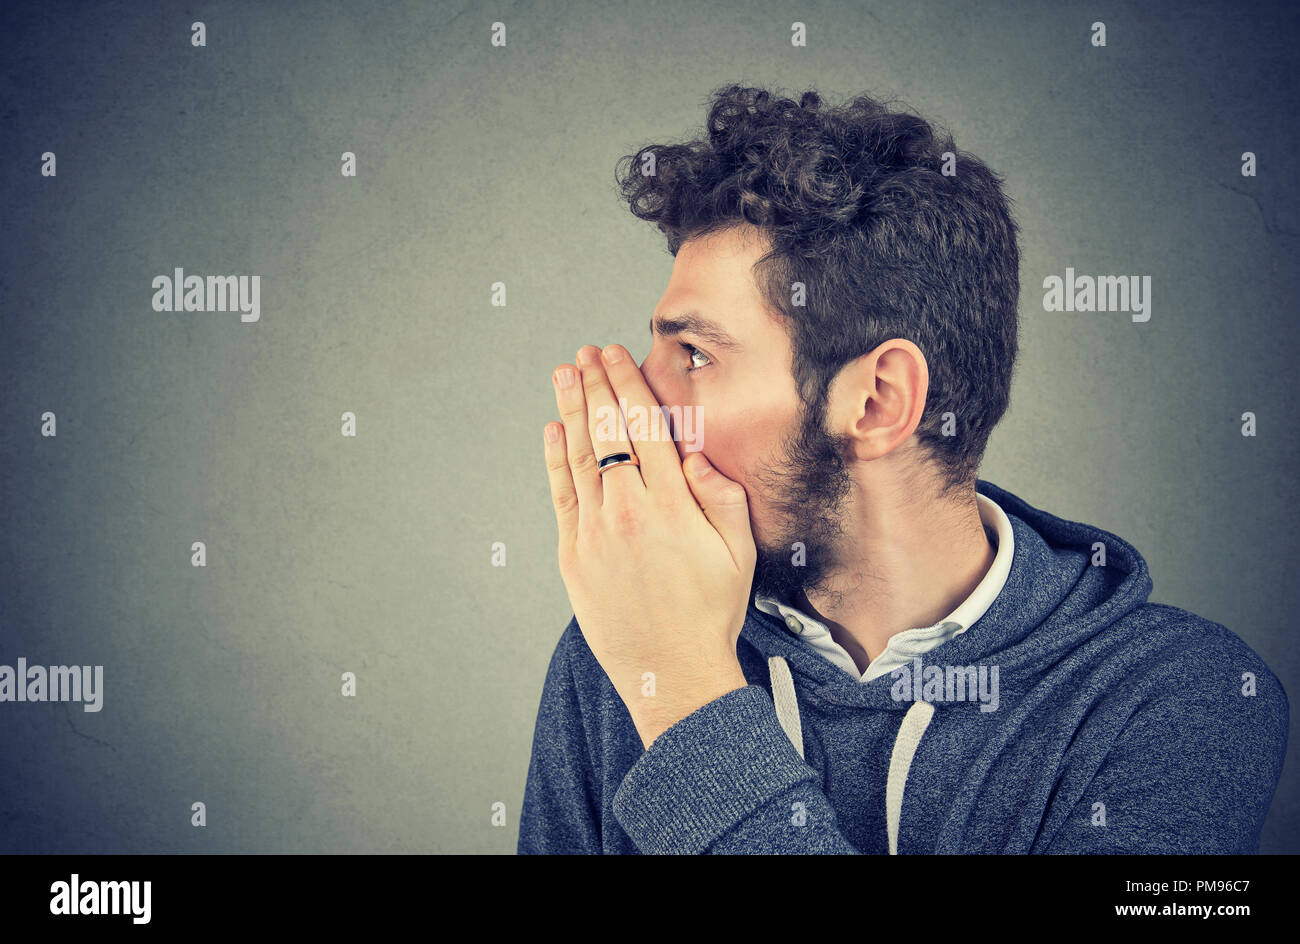 Young man covering mouth while gossiping and telling secrets in whisper. Stock Photo